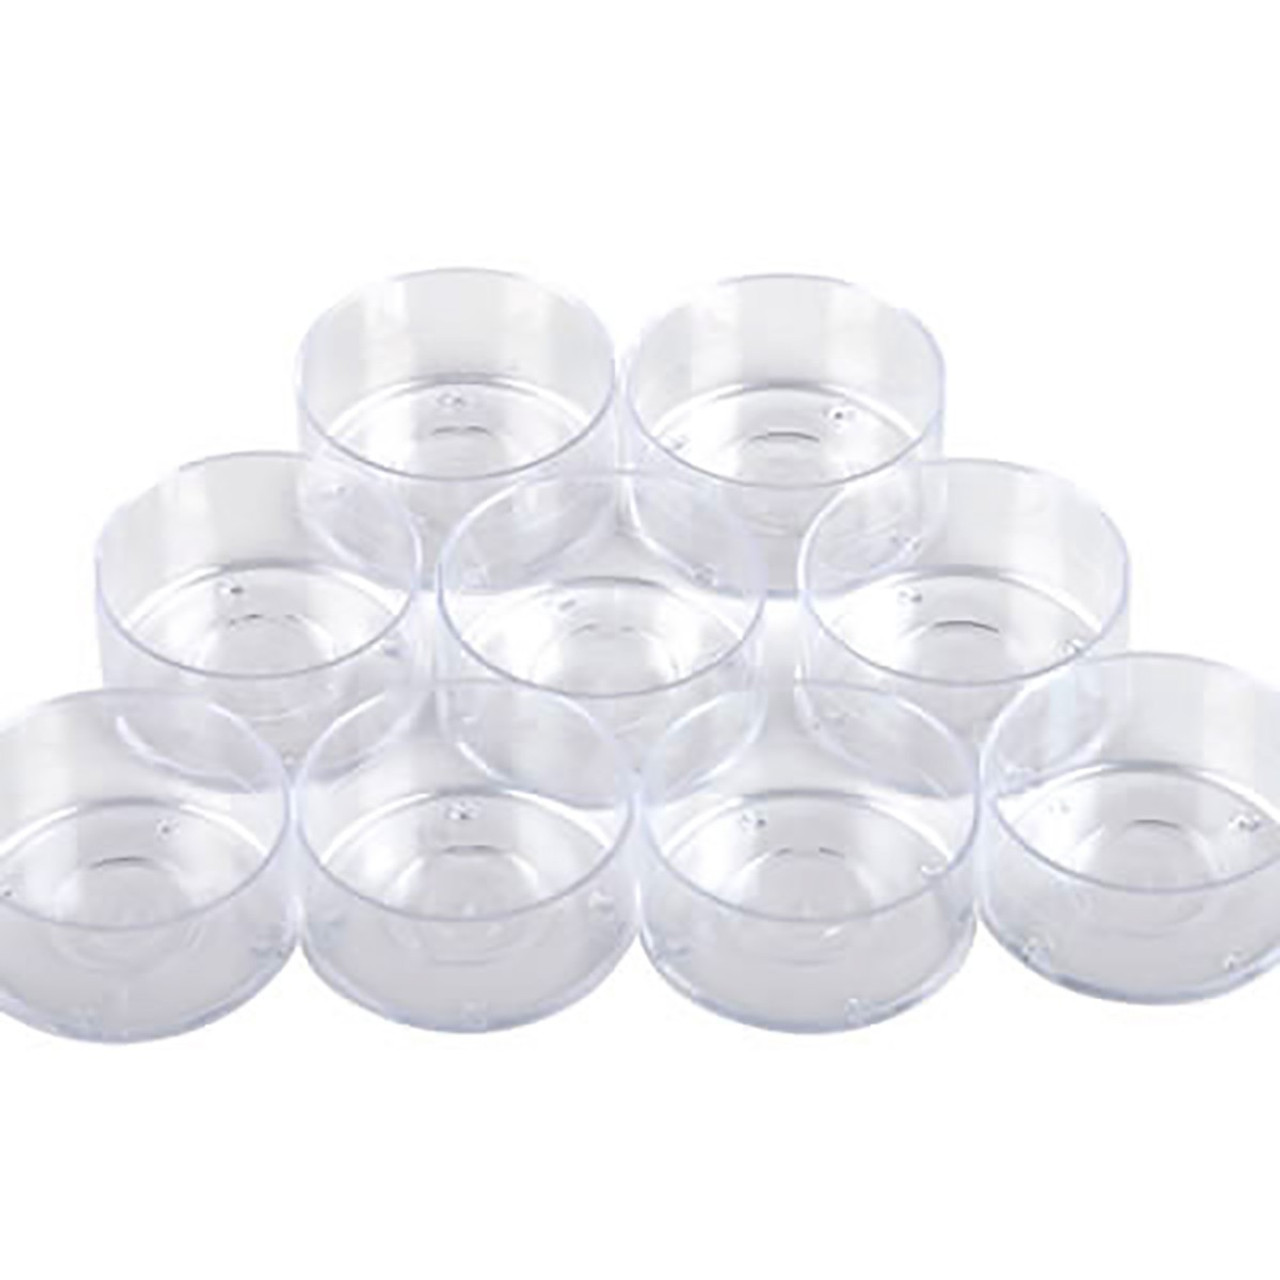 Aluminum Tealight Cups (100 Count) - Lone Star Candle Supply